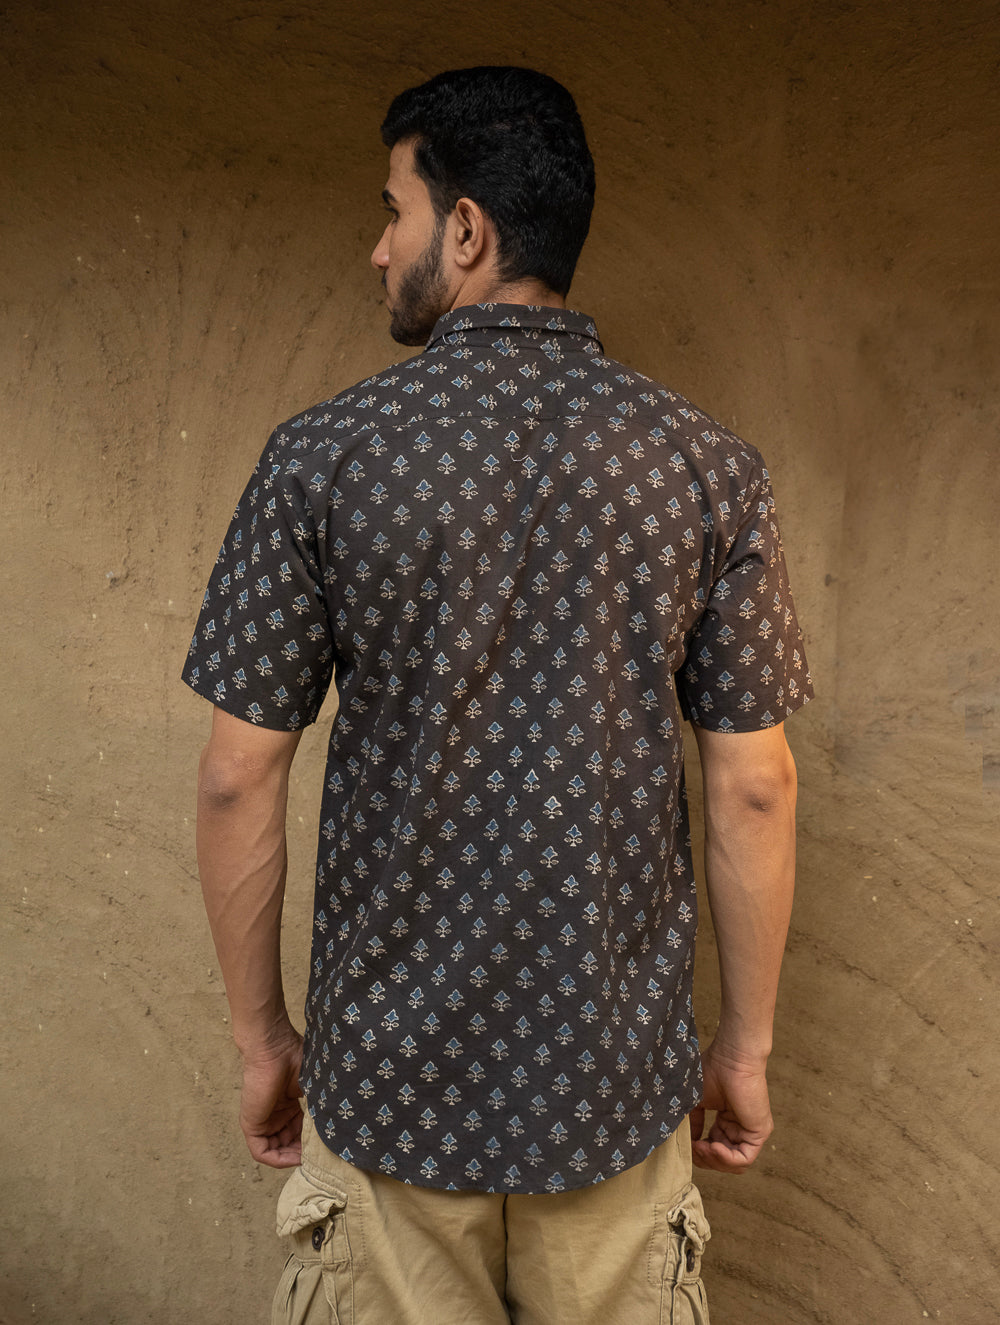 Load image into Gallery viewer, Ajrakh Hand Block Printed Cotton Shirt - Grey Floret